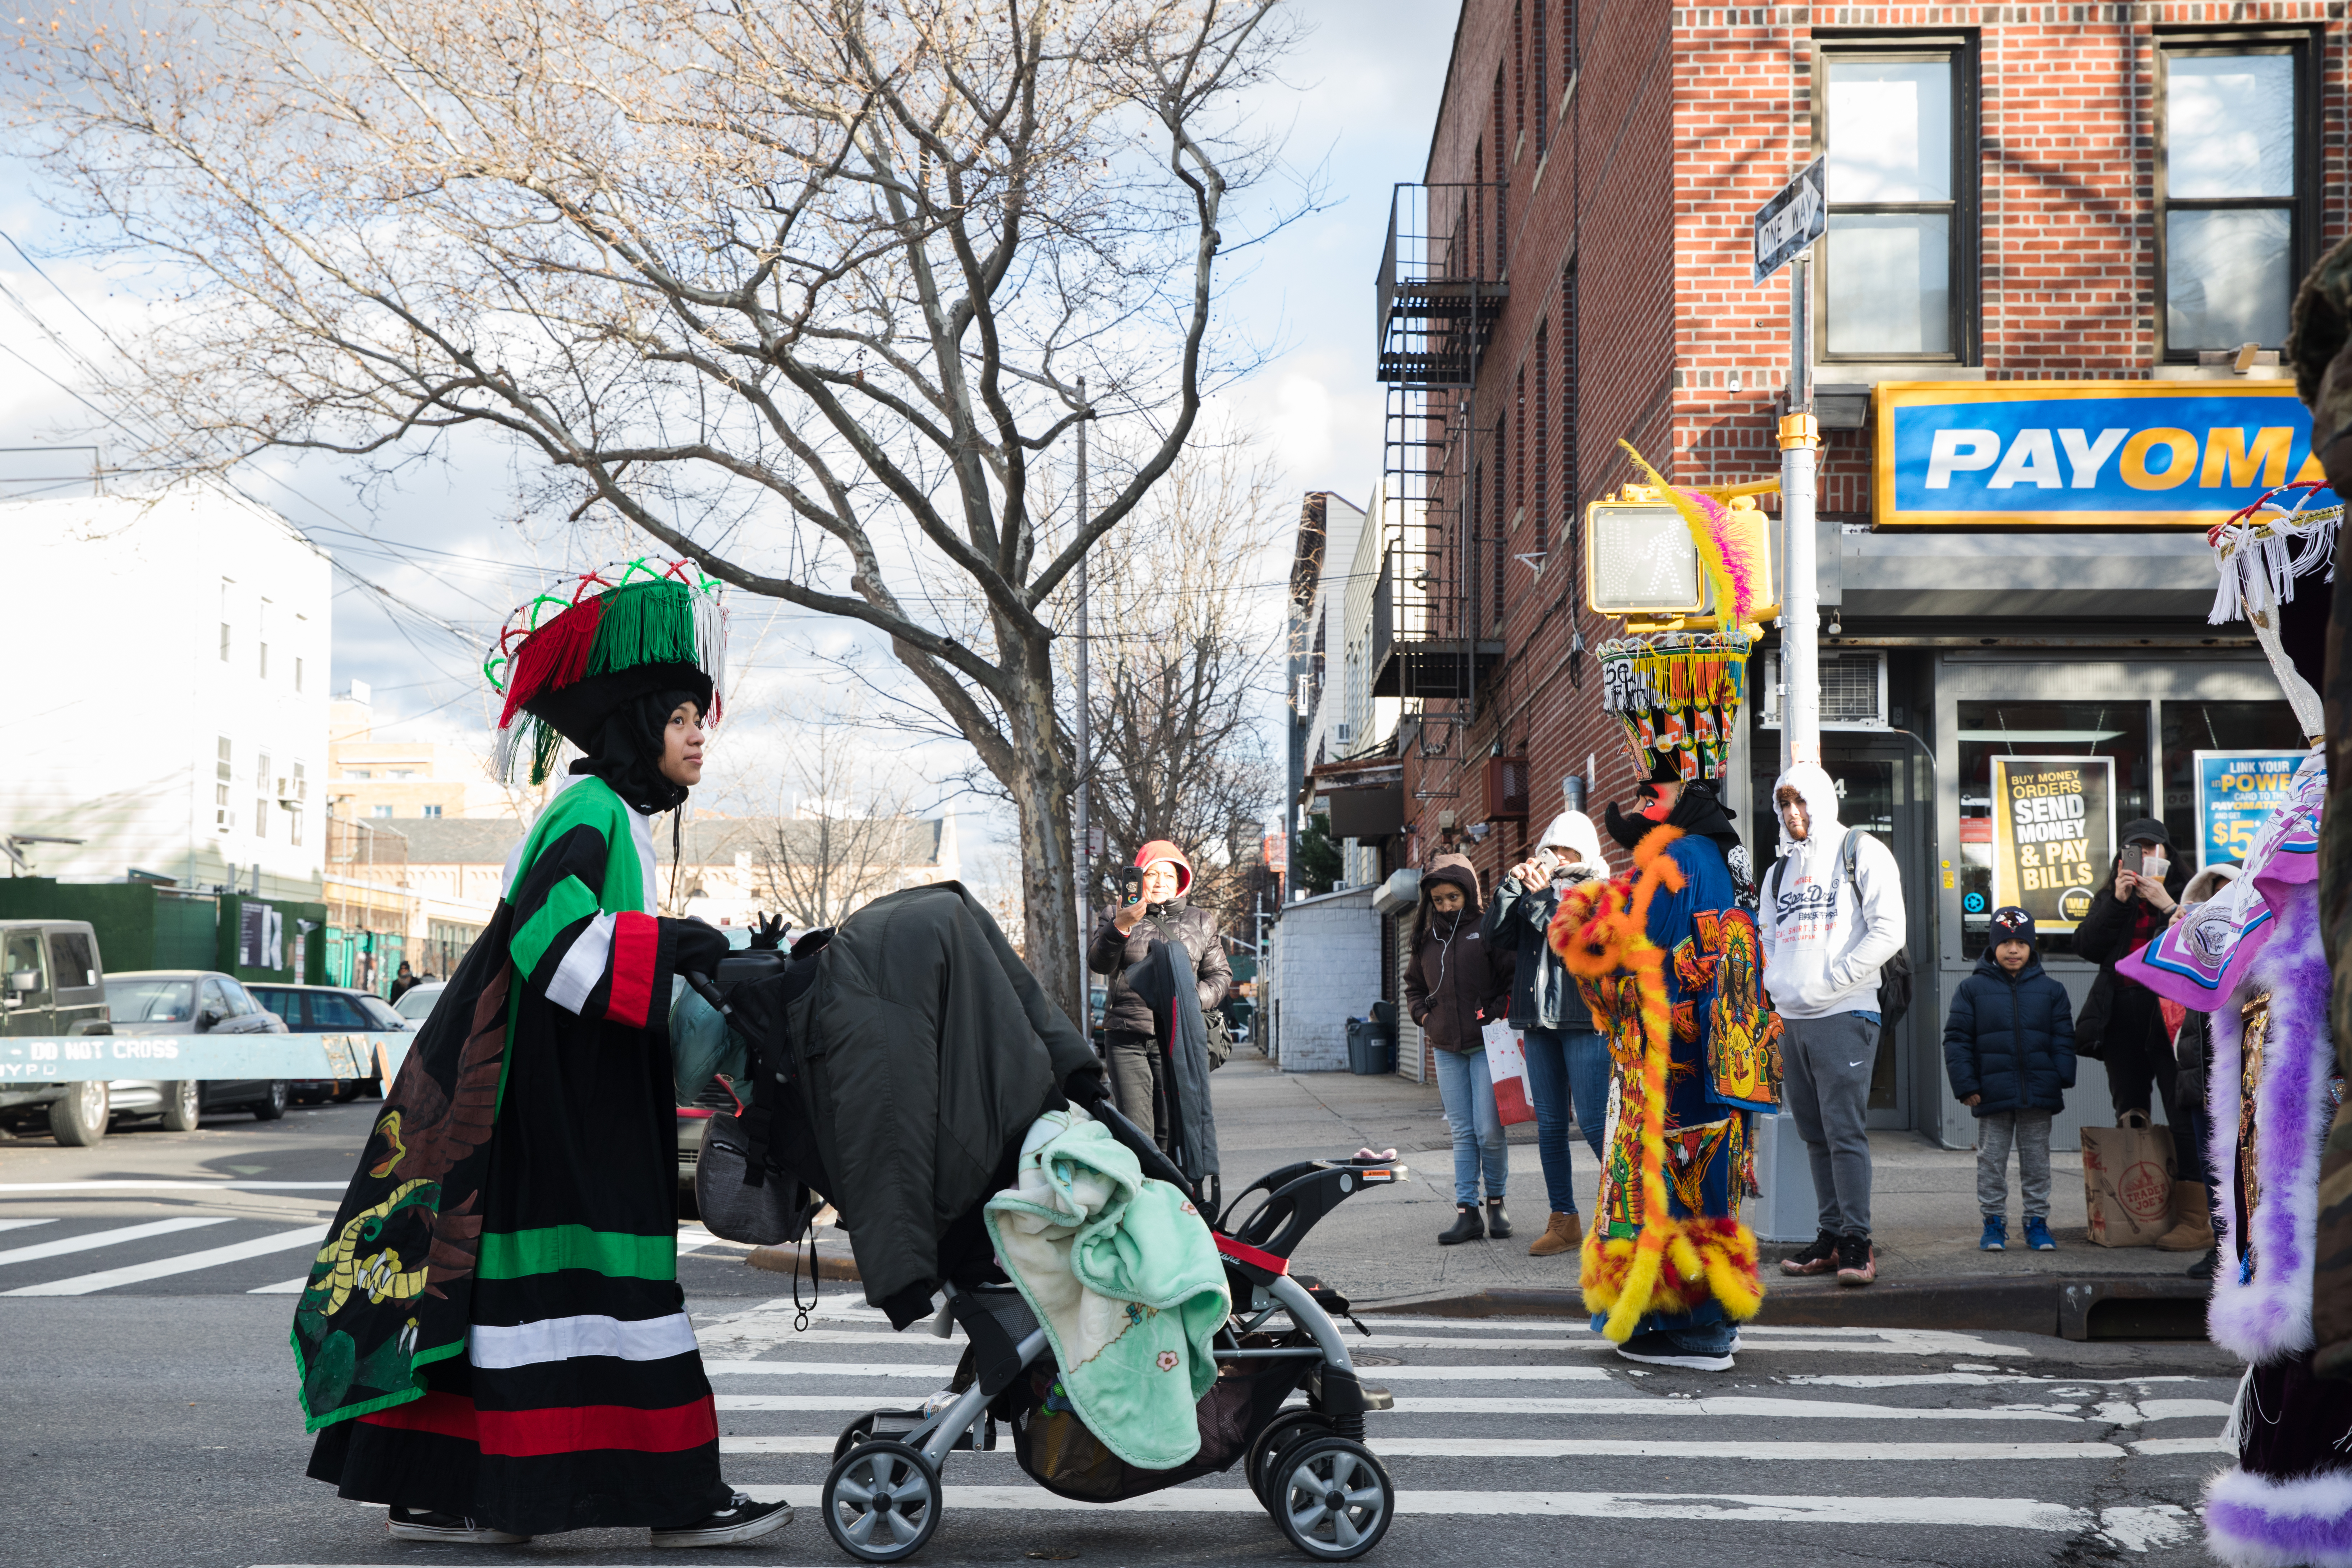 A woman in traditional Mexican dance attire pushes a stroller along the parade route.